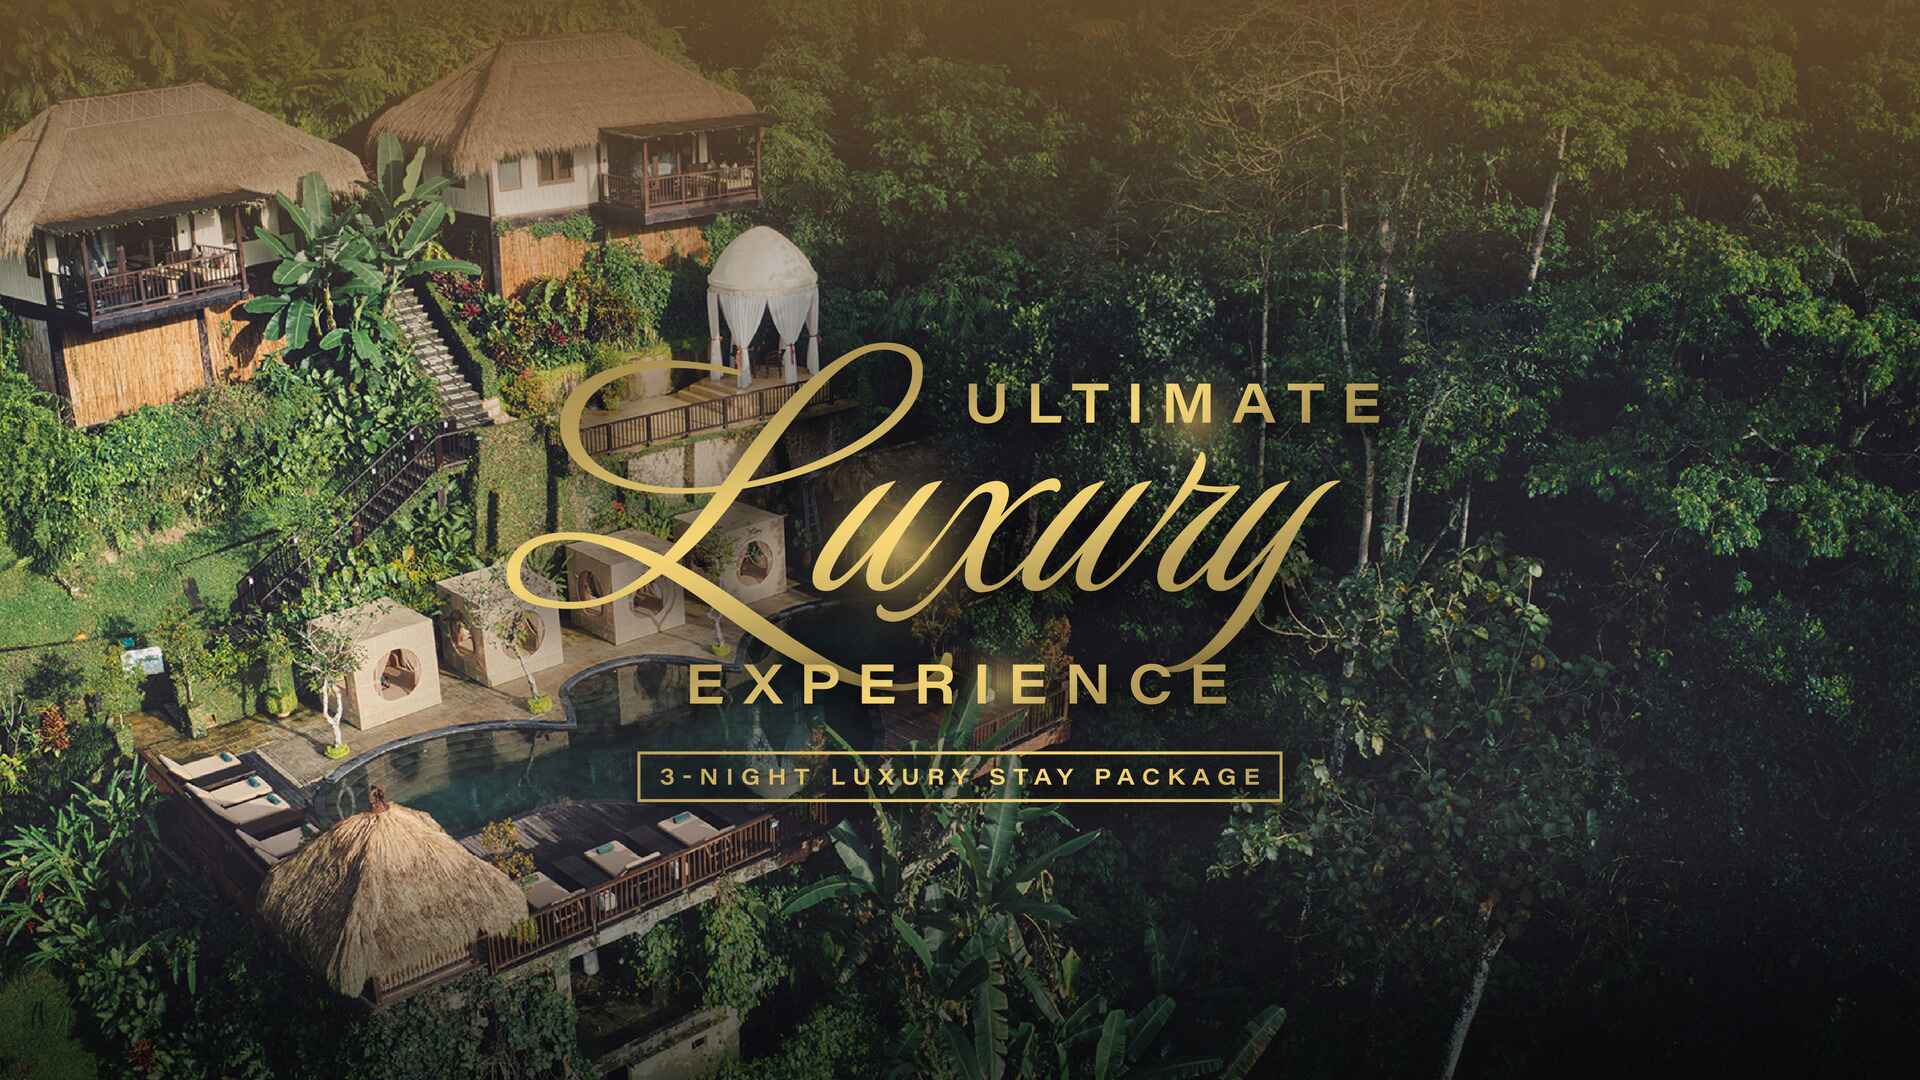 Offers - Ultimate Luxury Experience